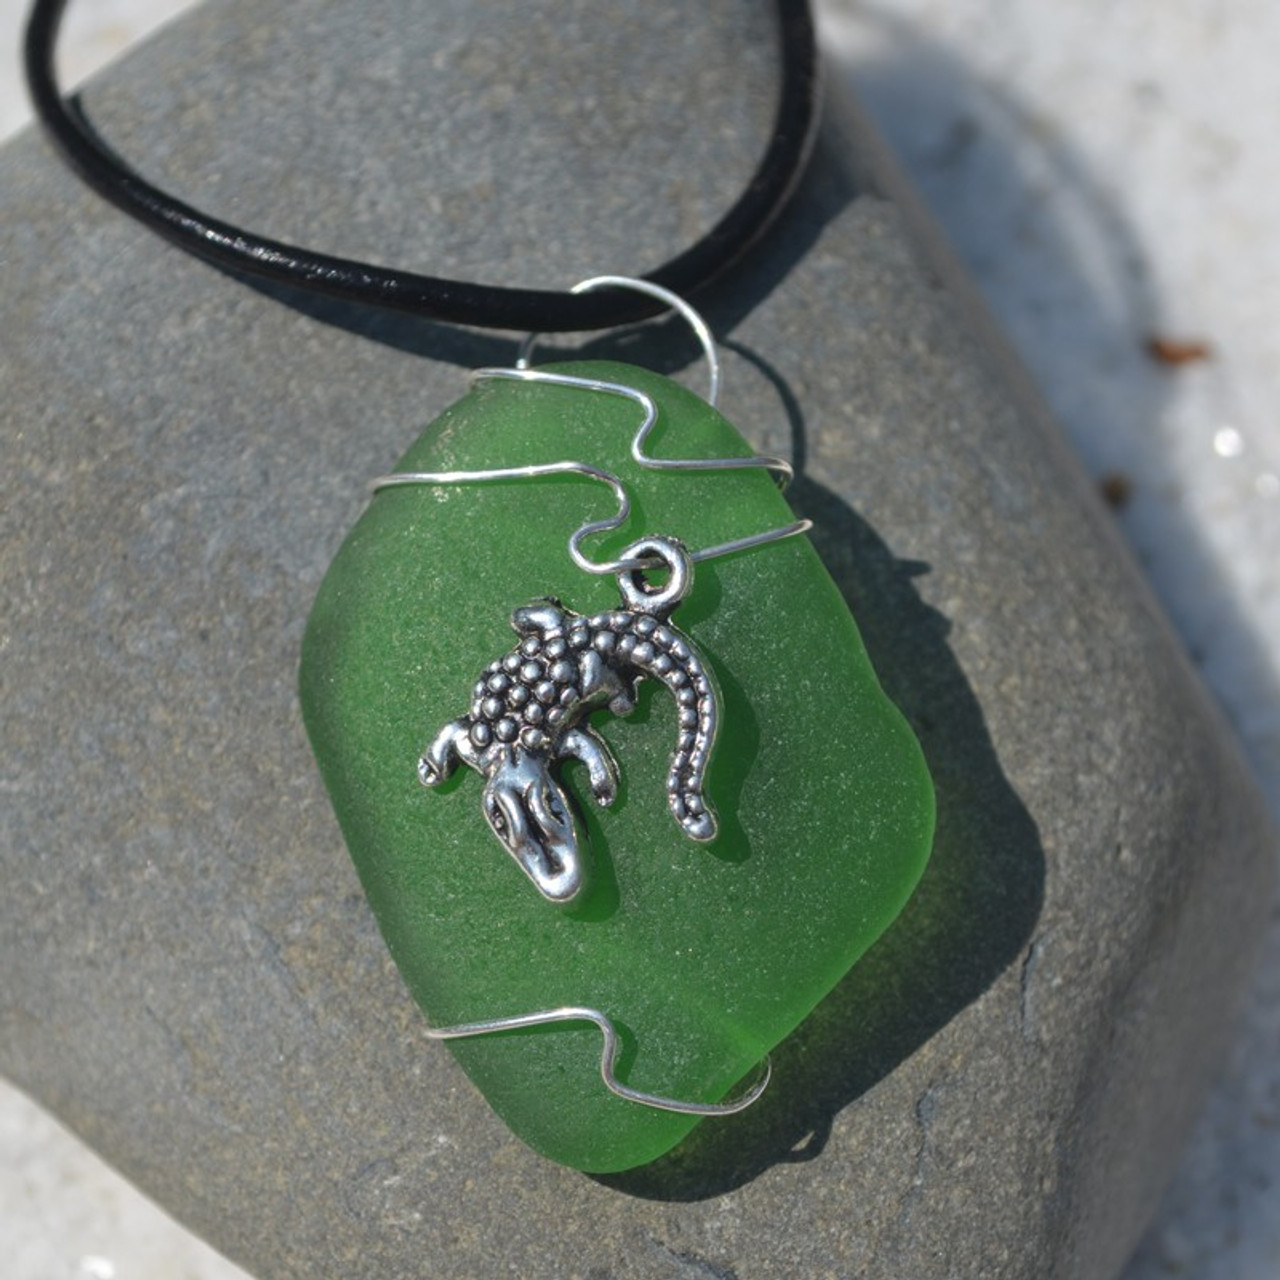 Custom Handmade Genuine Sea Glass Necklace with a Silver Alligator Charm - Choose the Color - Frosted, Green, Brown, or Aqua